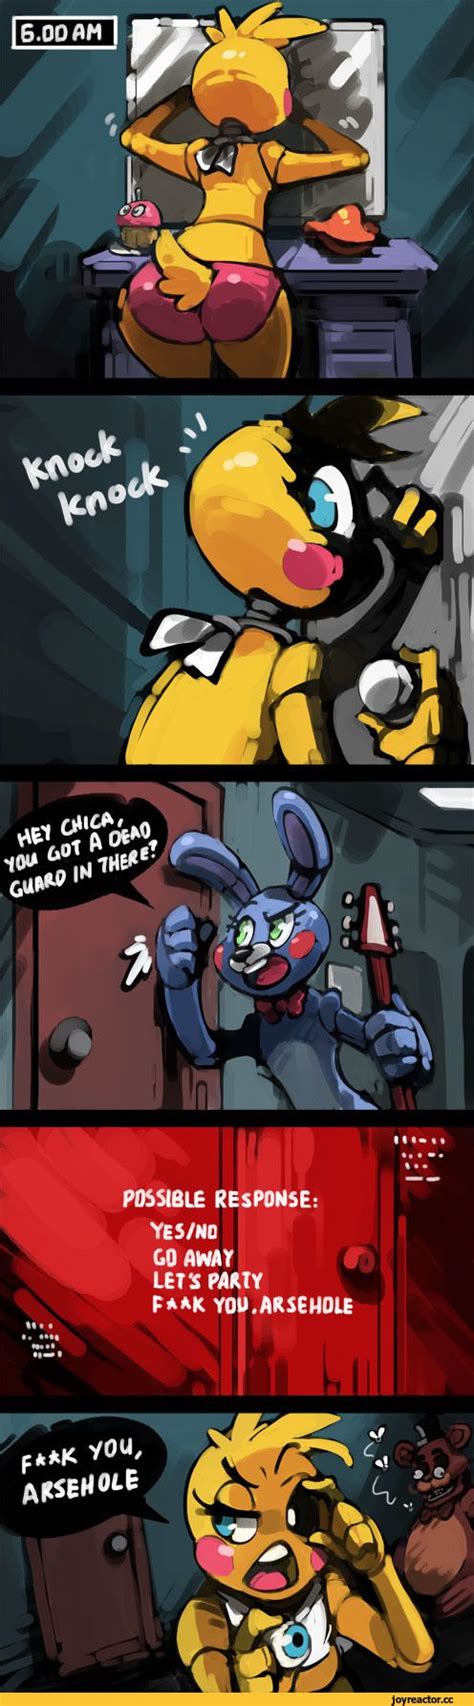 17 Best Images About Five Nights At Freddys On Pinterest